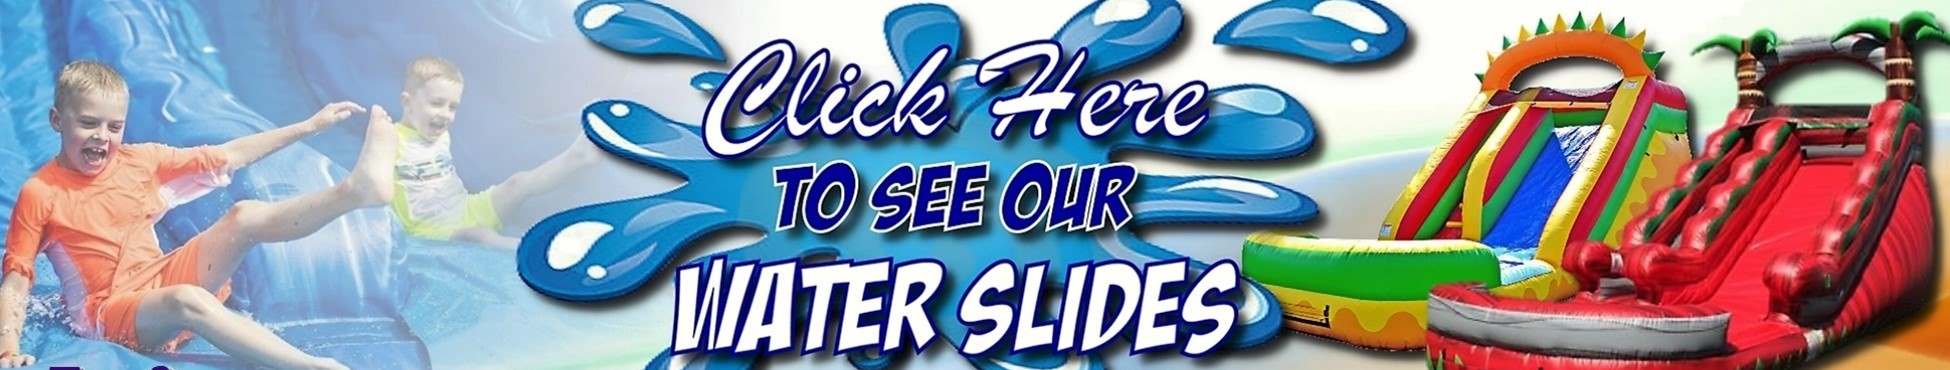 Water slides For rent